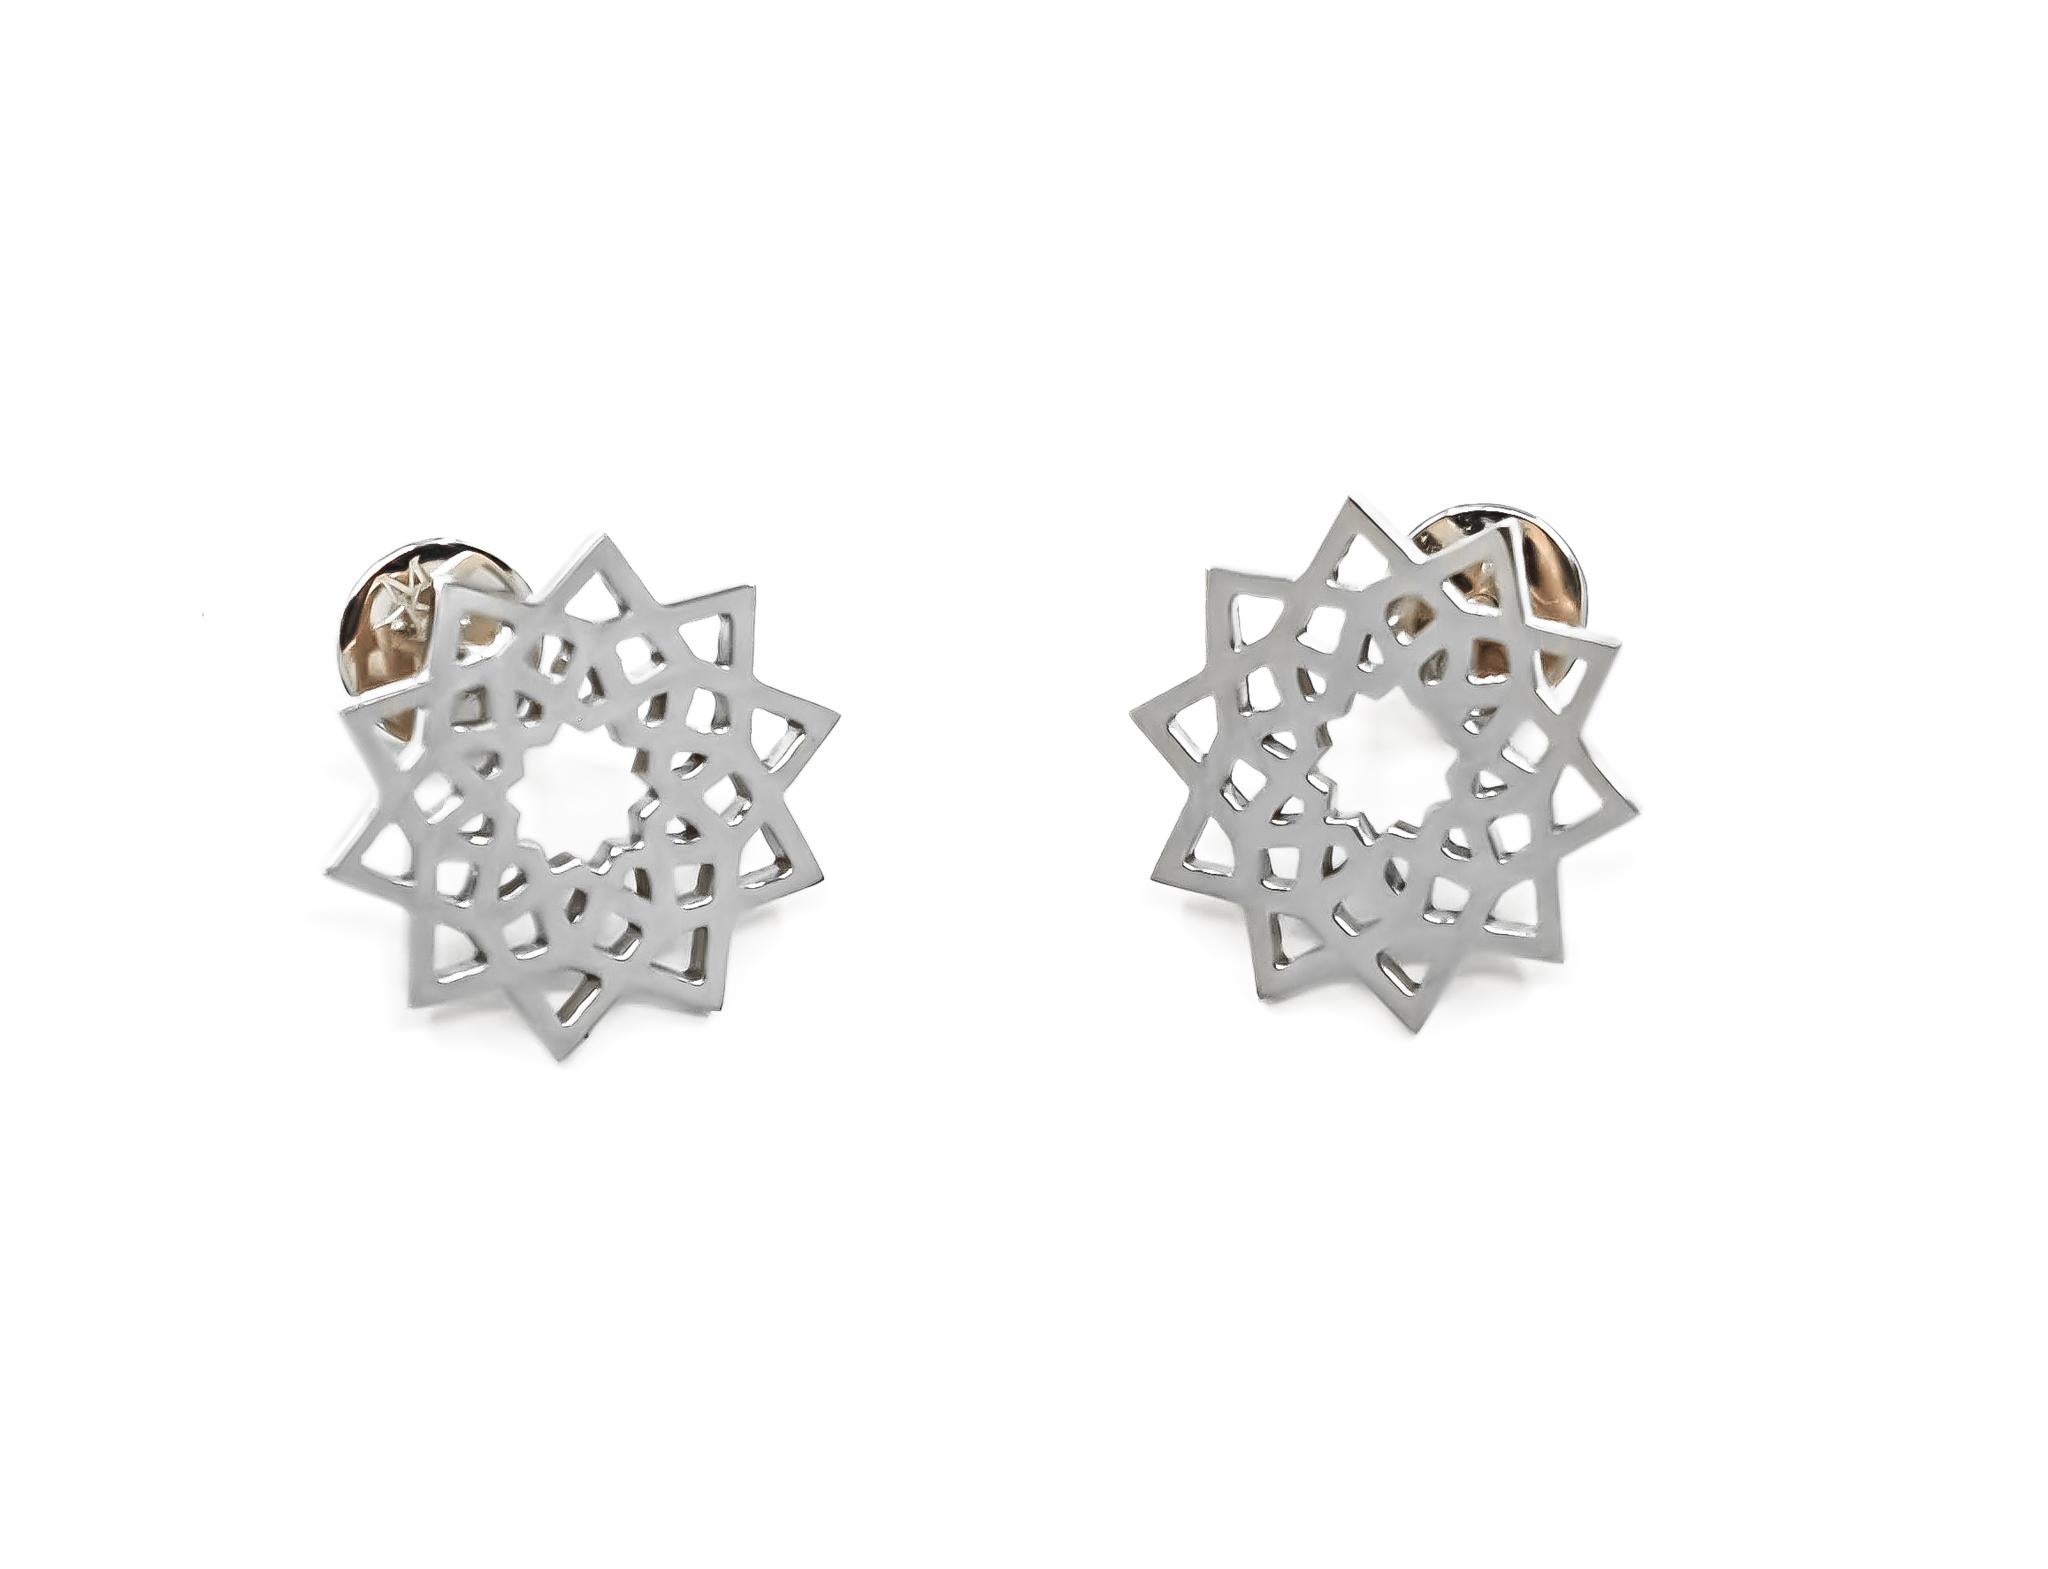 Arabesque Deco Andalusian Style Stud Earrings in 18kt White Gold For Sale 1